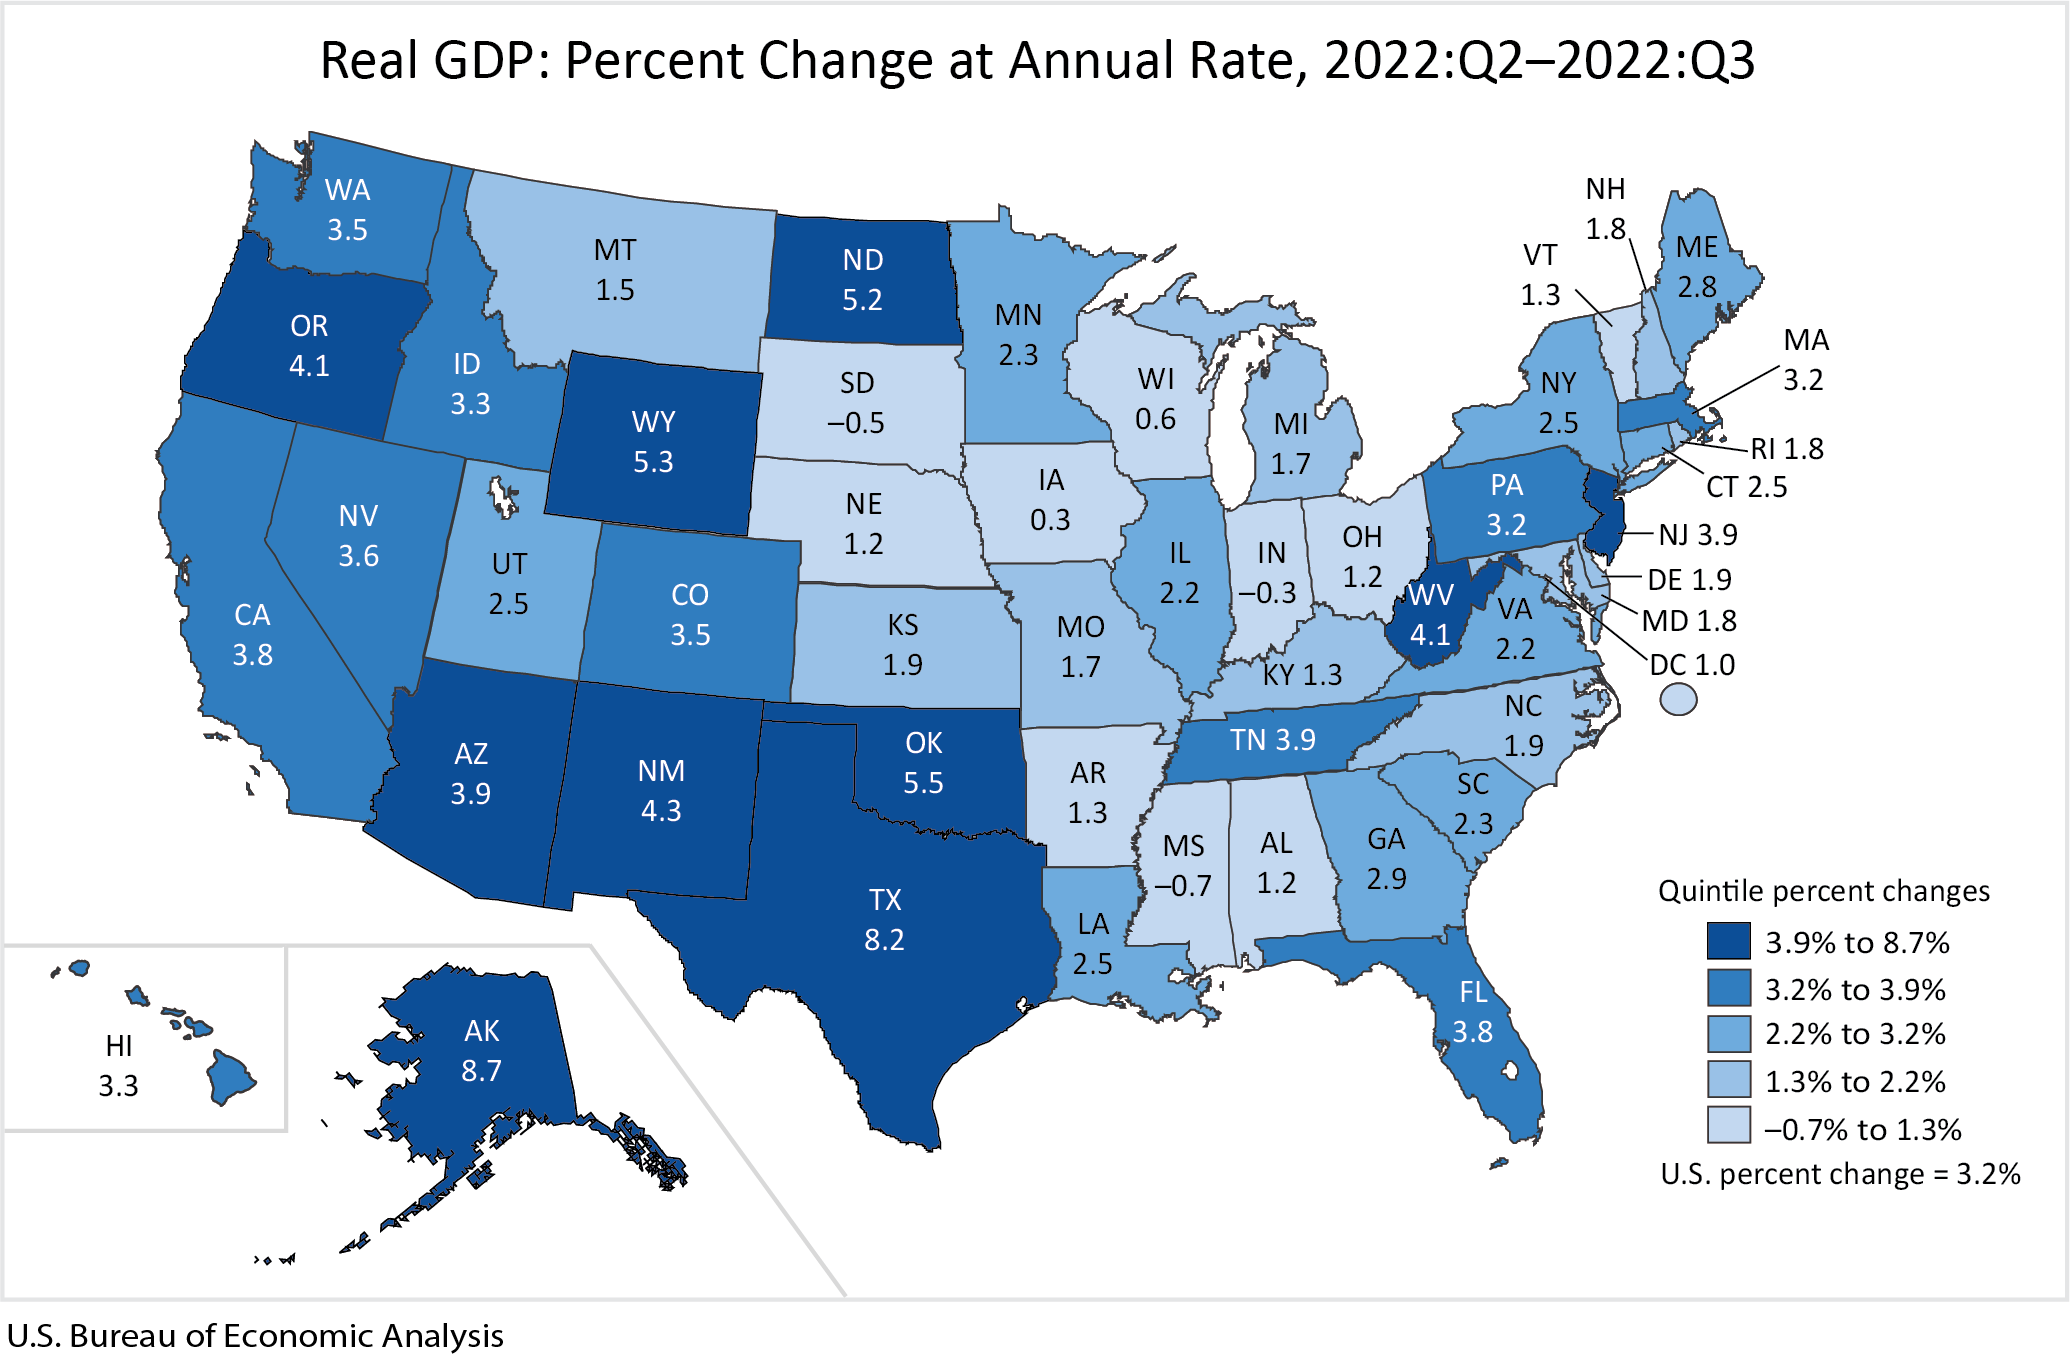 Real GDP: Percent Change at Annual Rate, 2022:Q2-2022:Q3